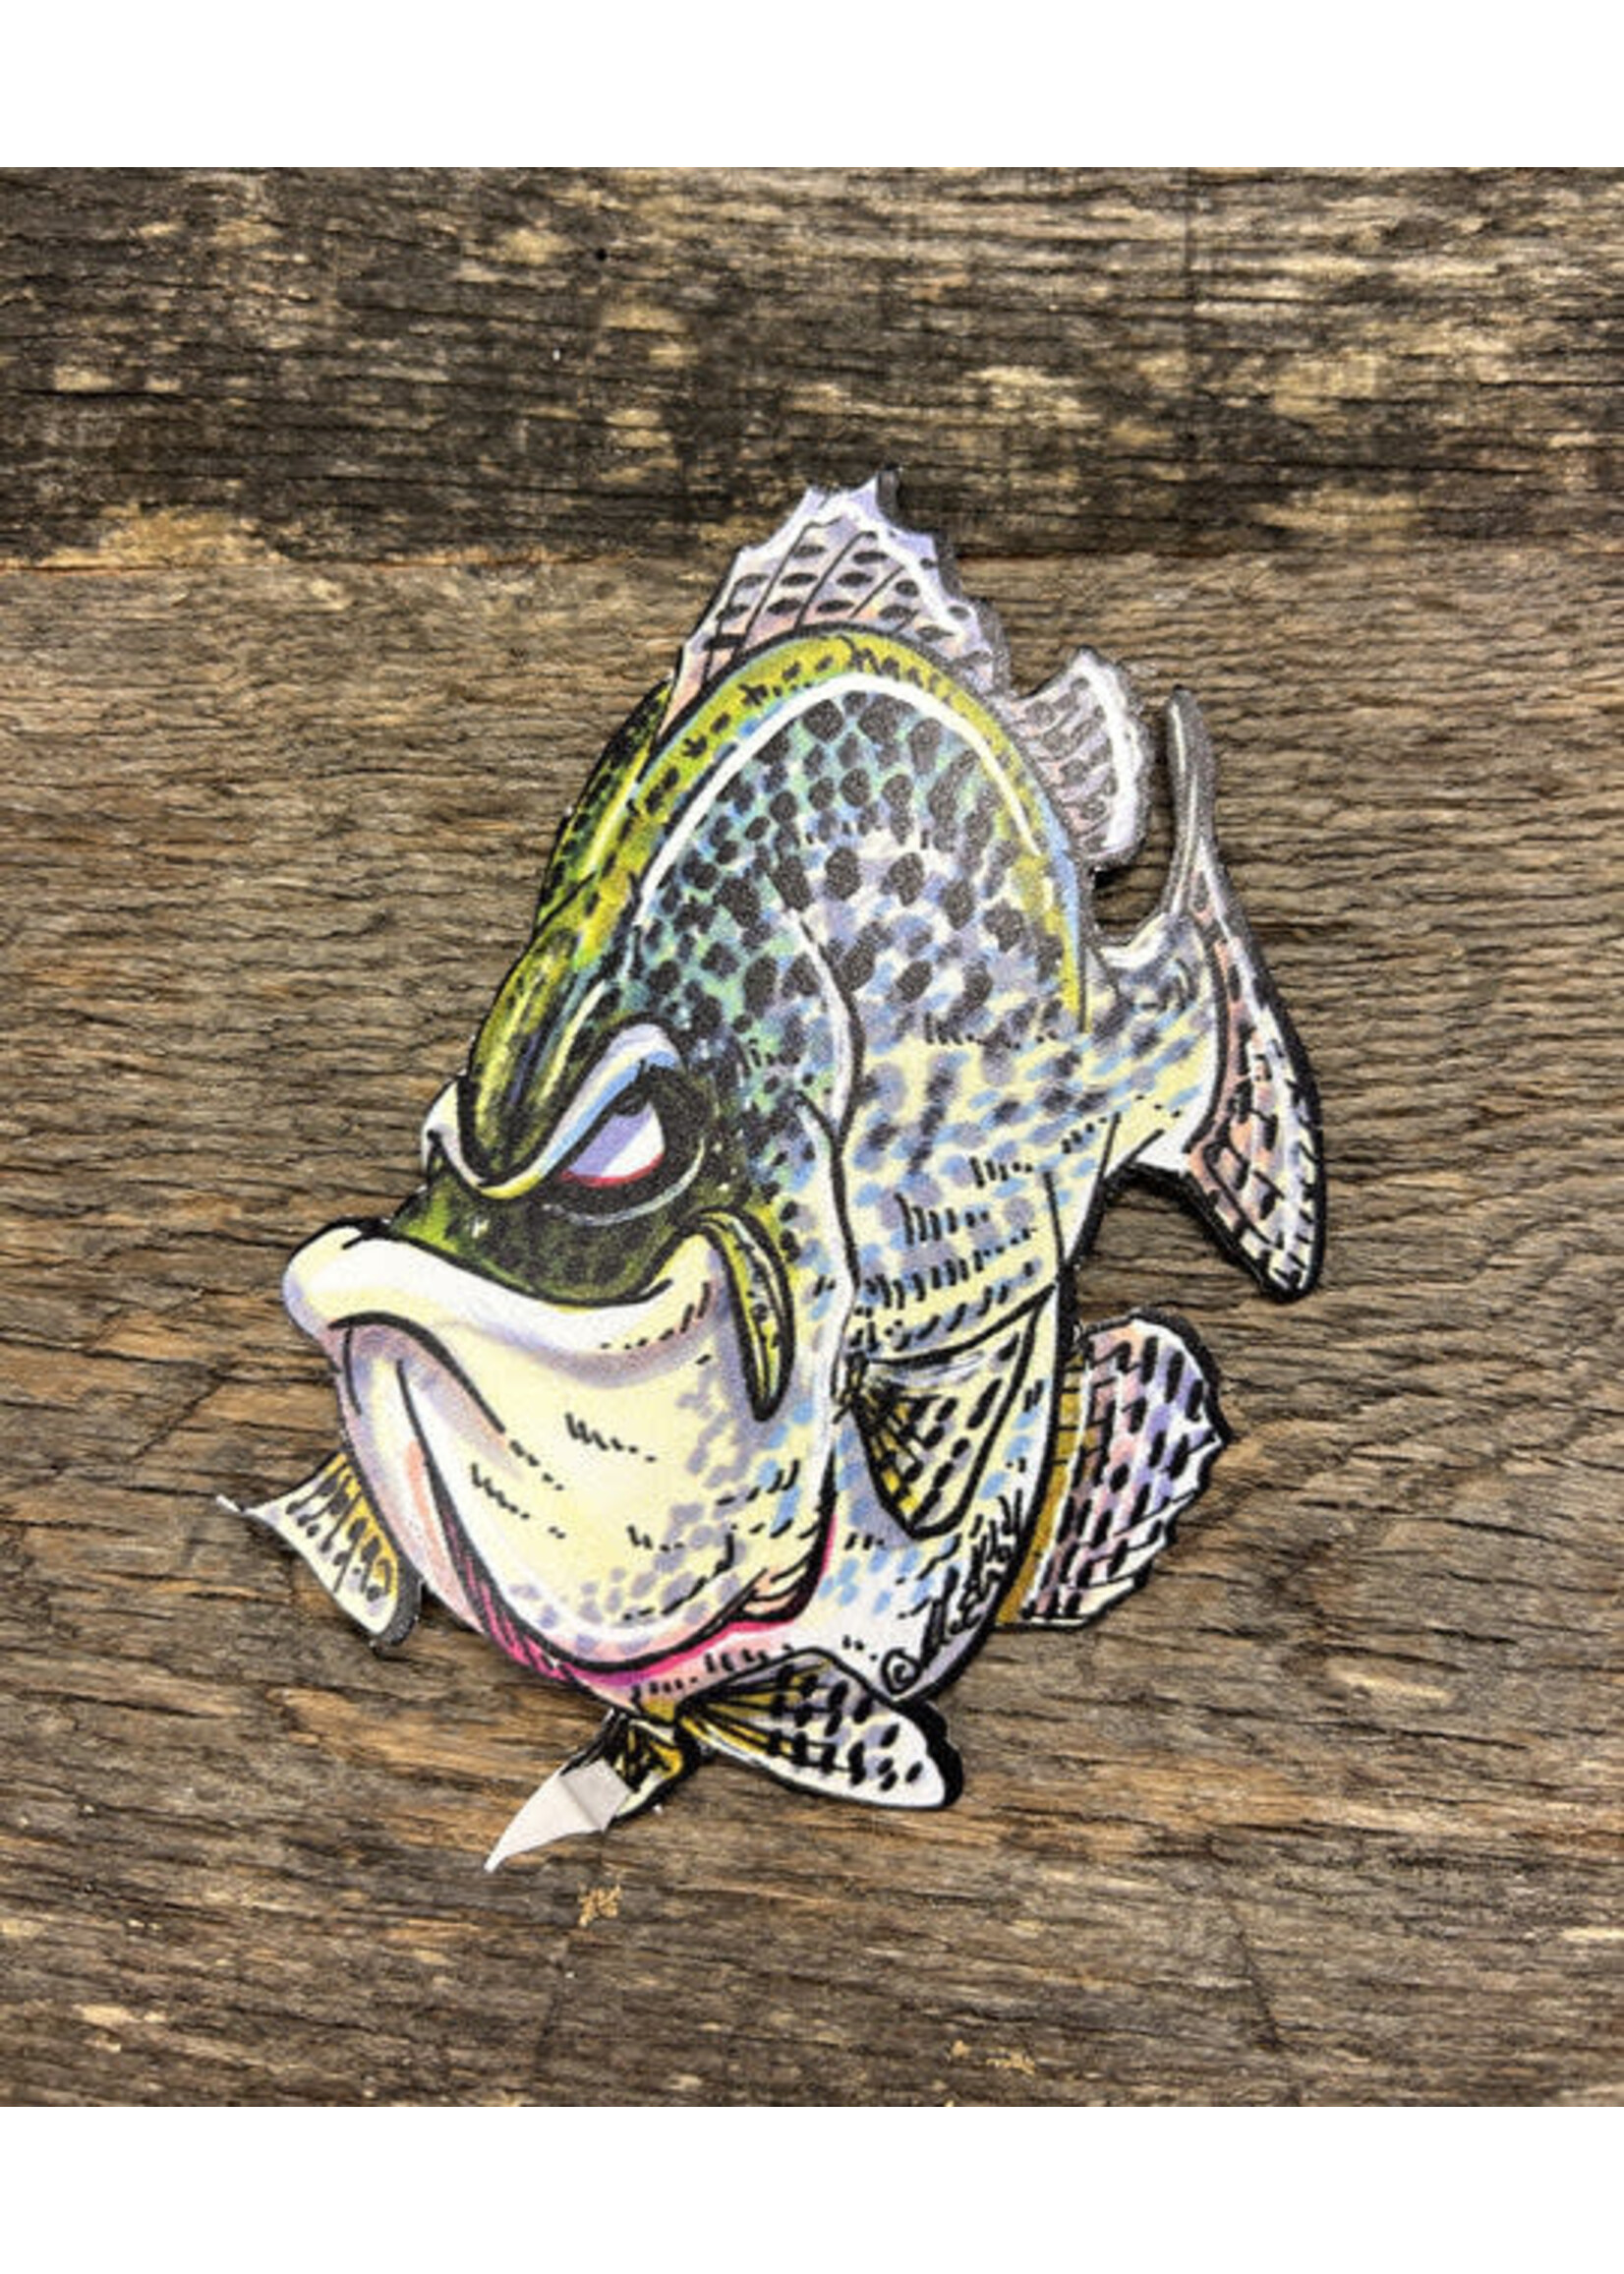 Fishing Complete Speckles (Crappie) Decal - Tackle Shack